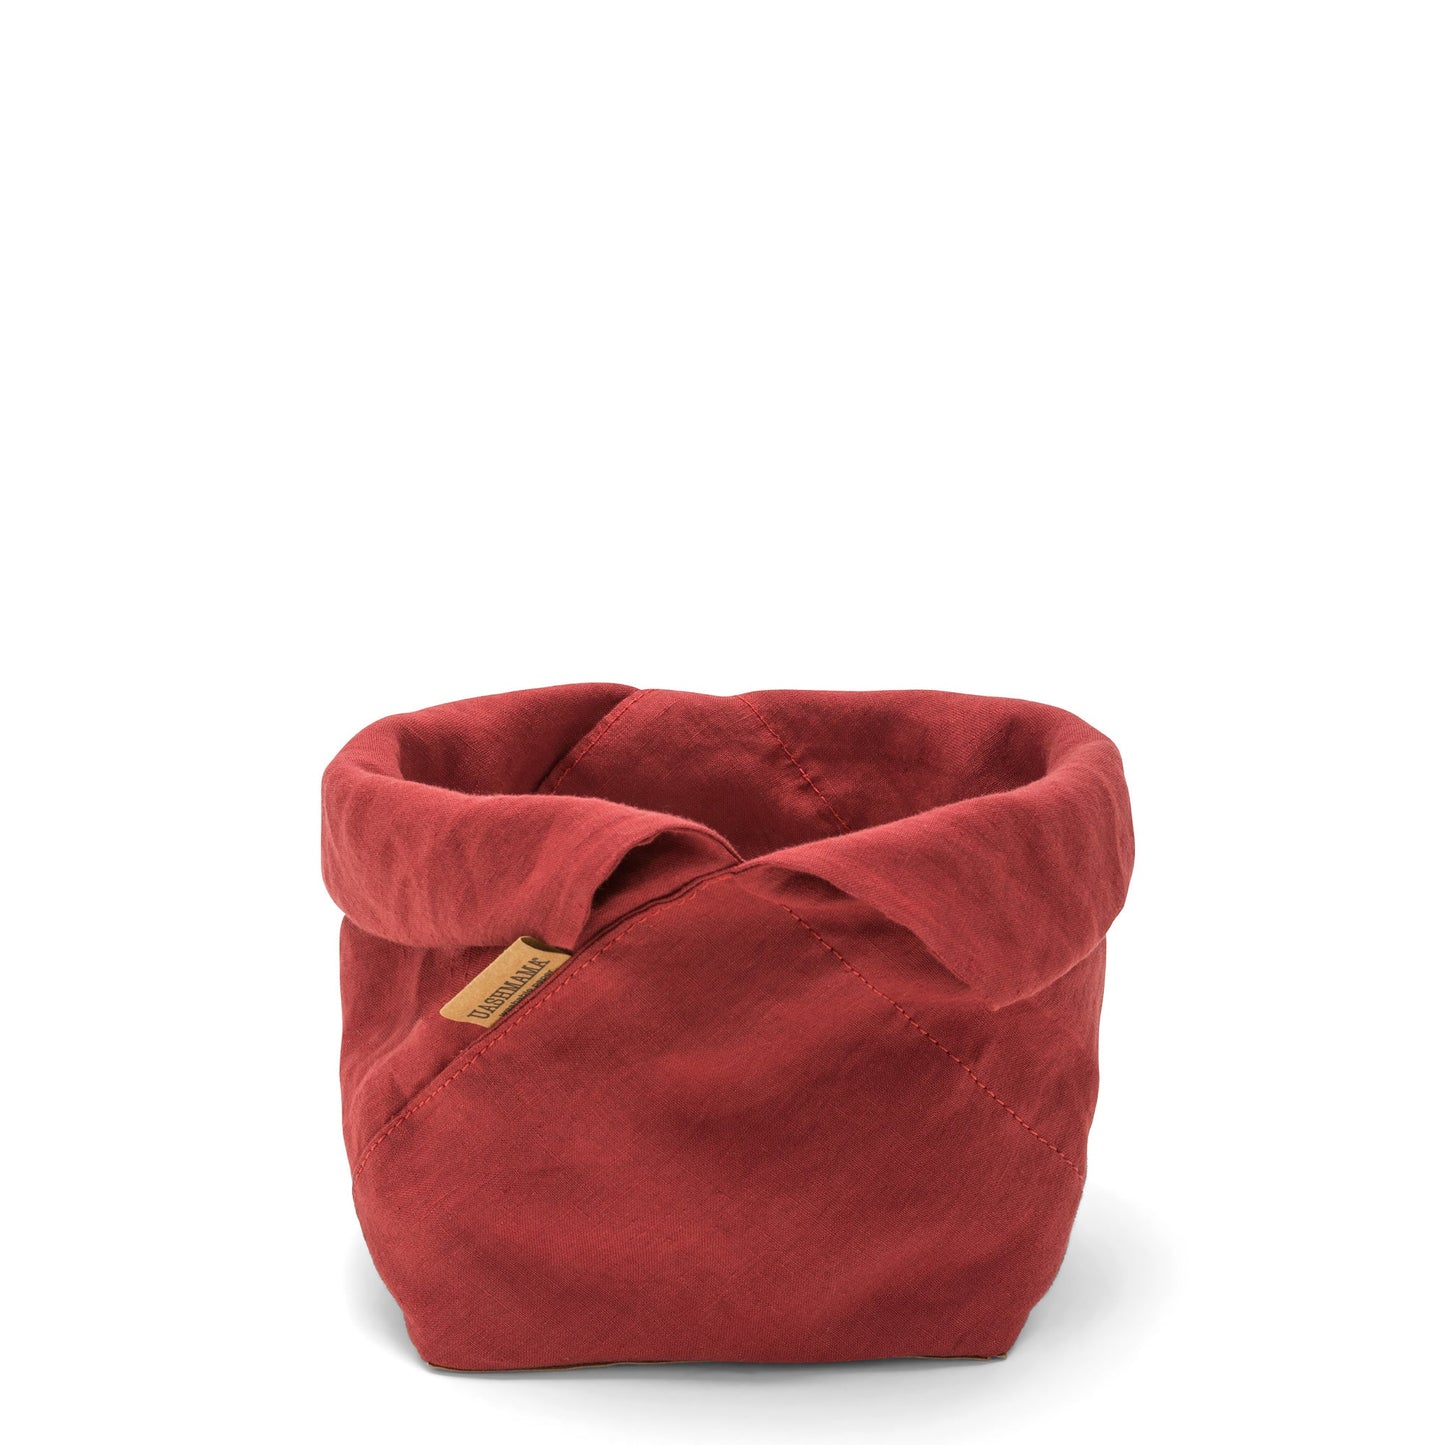 A red linen bread bag is shown with the top rolled down, open. A brown logo UASHMAMA tag features on the front side.